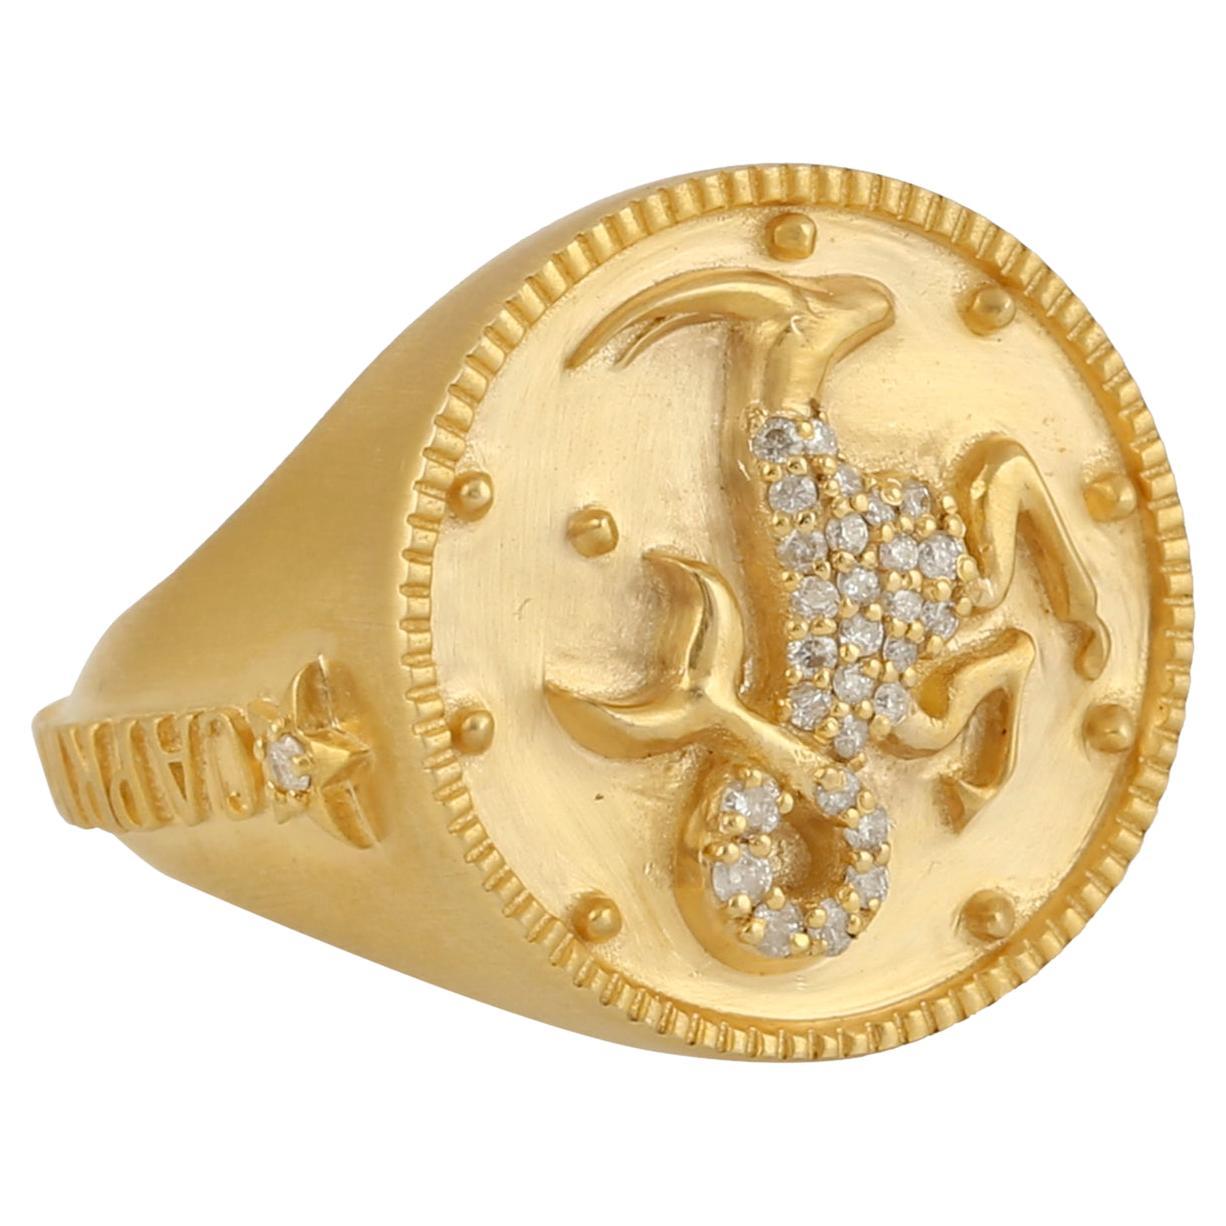 Capricorn Zodiac Ring with Natural Pave Diamonds Made in Yellow Gold